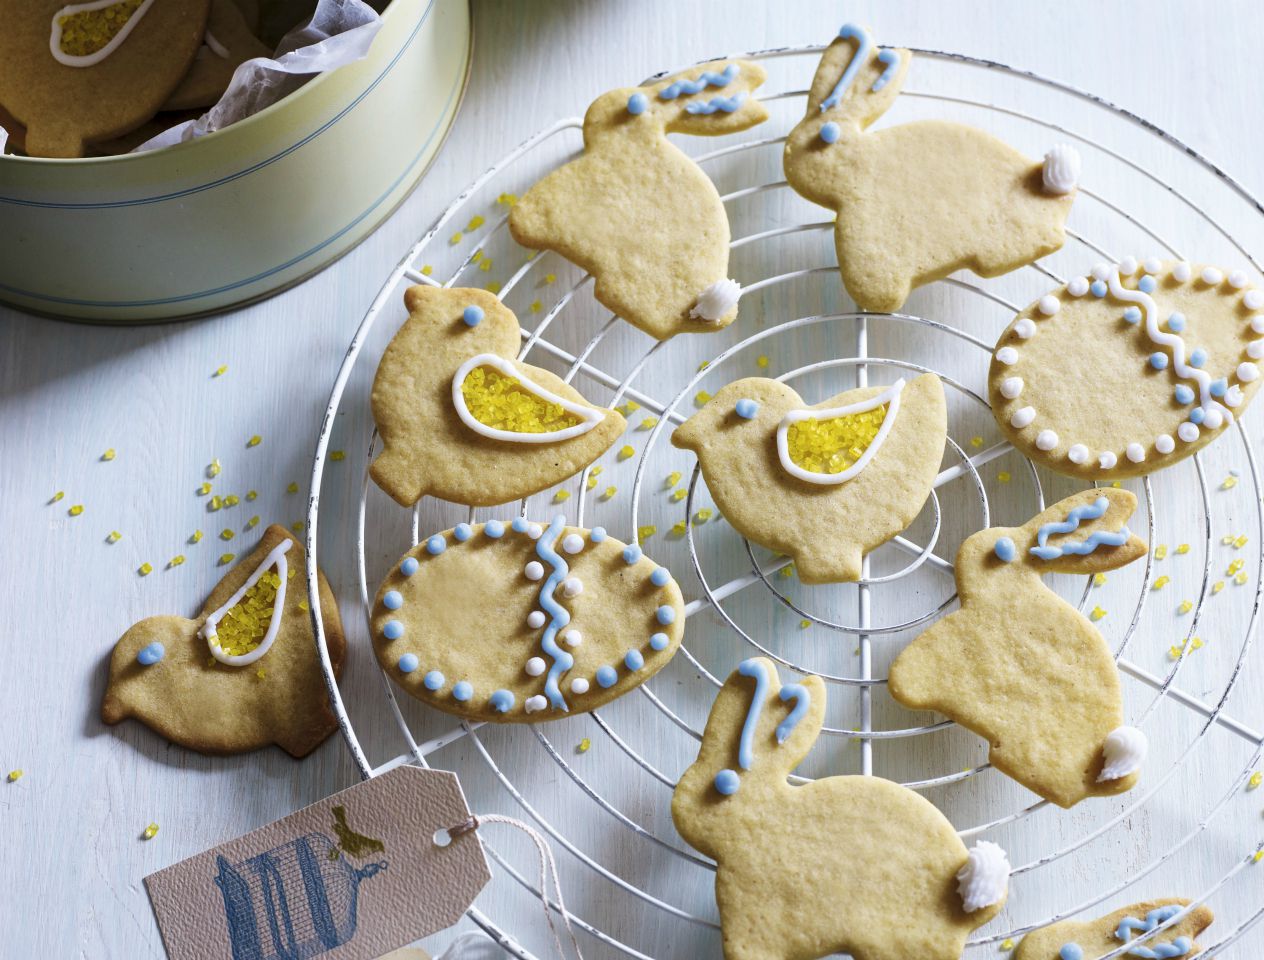 Delicious-looking bunny biscuits on a cooling tray